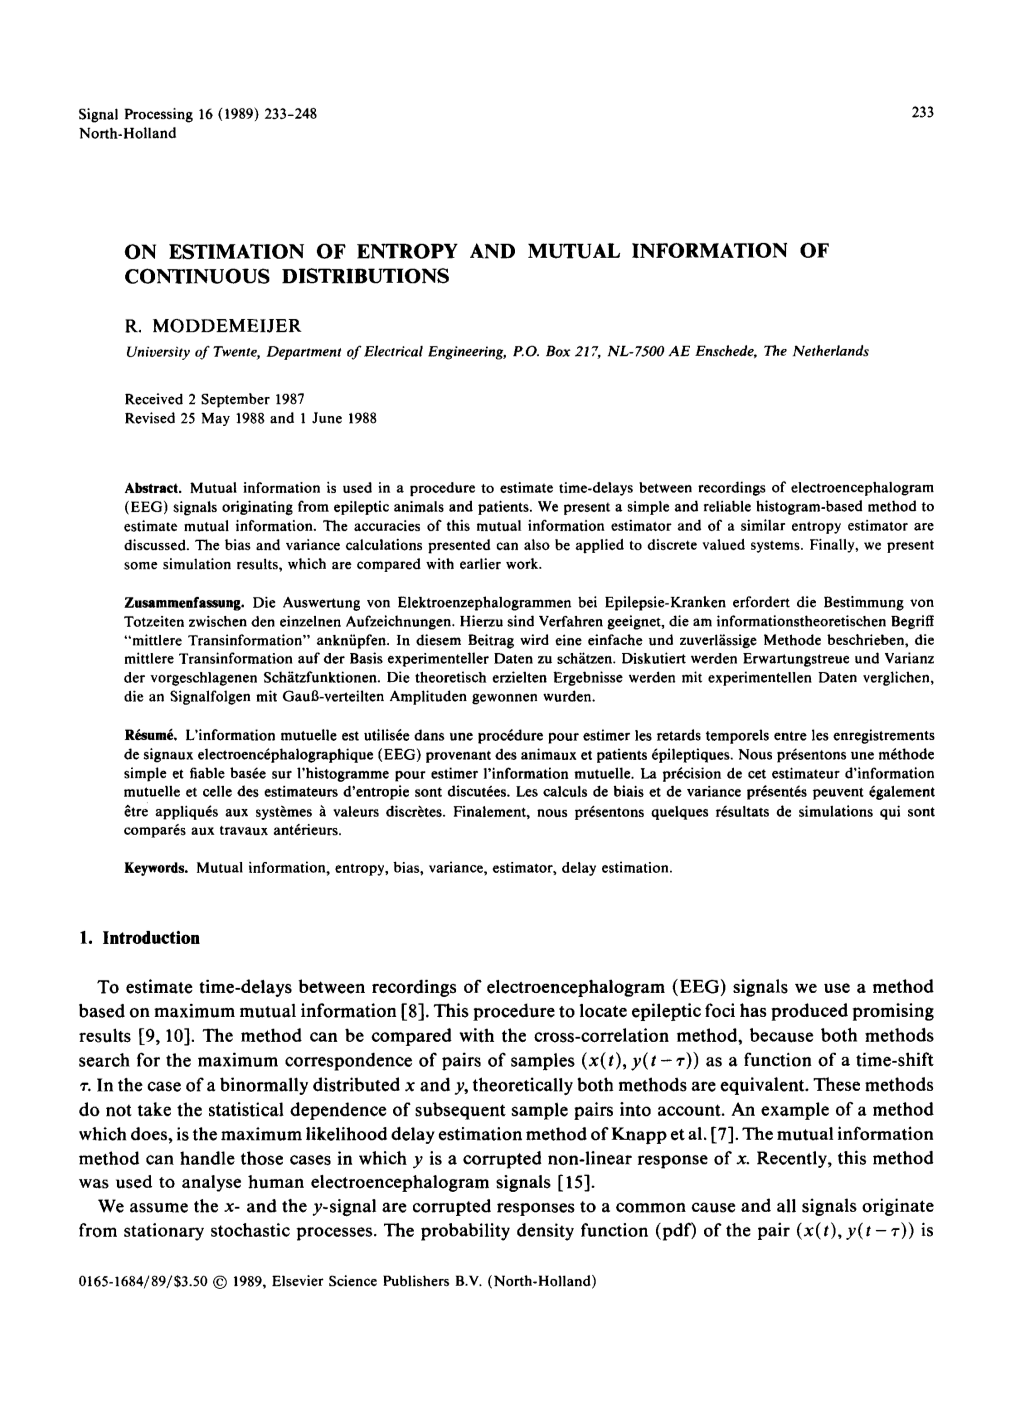 ON ESTIMATION of ENTROPY and MUTUAL INFORMATION of CONTINUOUS DISTRIBUTIONS R. MODDEMEIJER 1. Introduction to Estimate Time-Dela